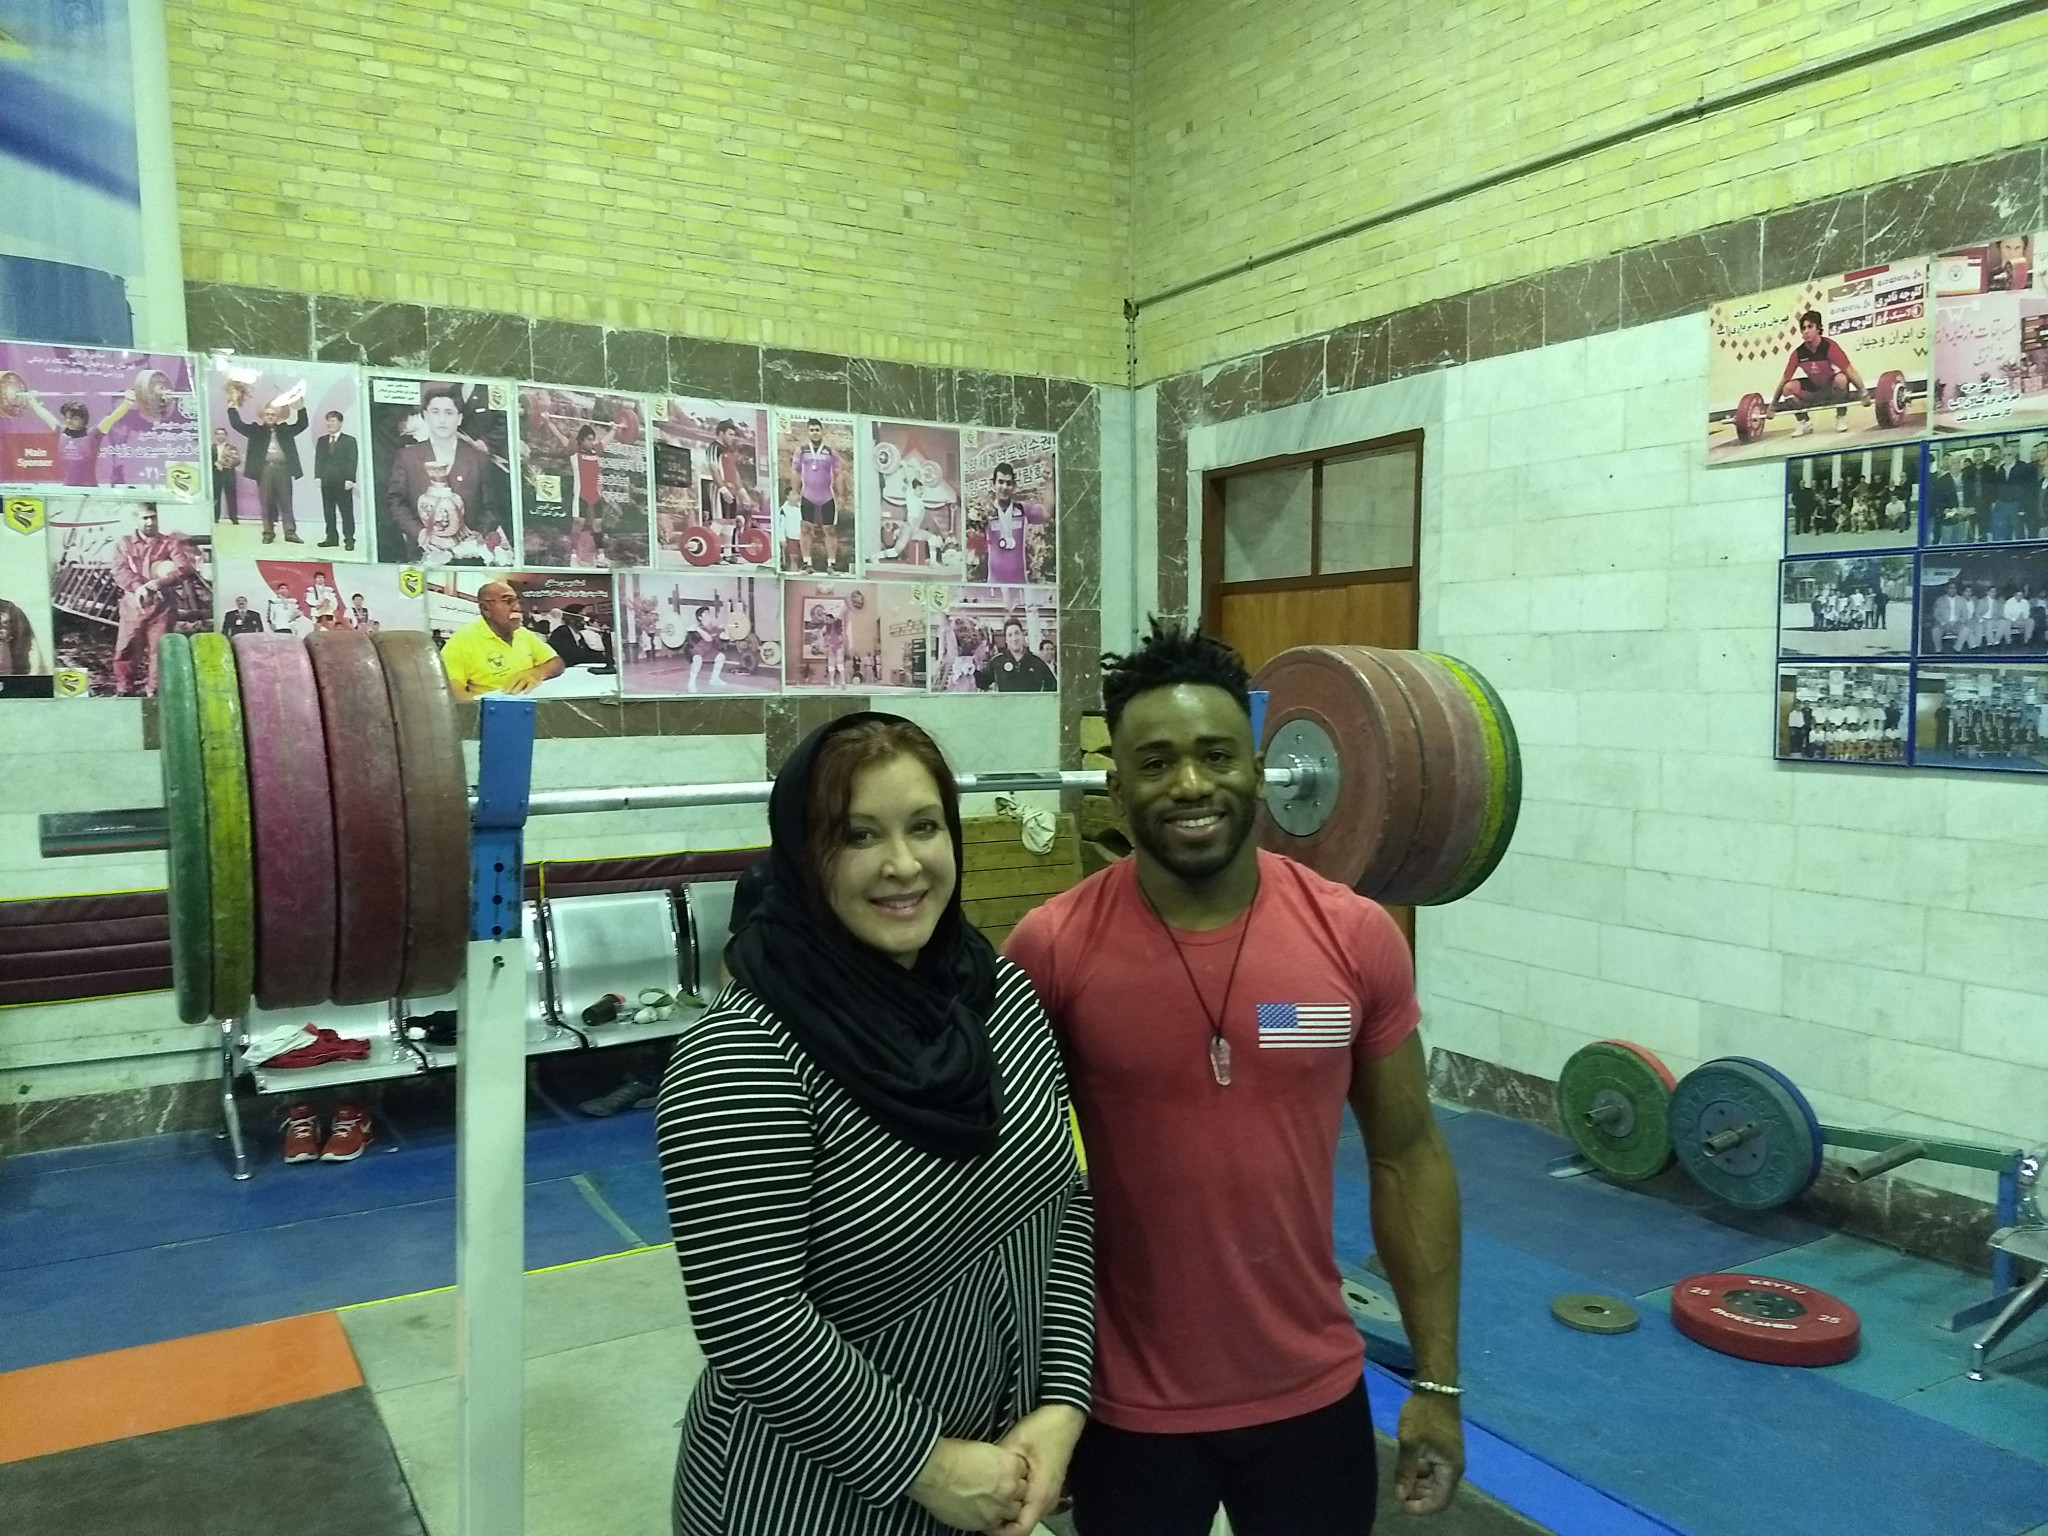 Ursula Papandrea is seen in Iran with Derrick Johnson, one of many athletes she has coached ©Derrick Johnson